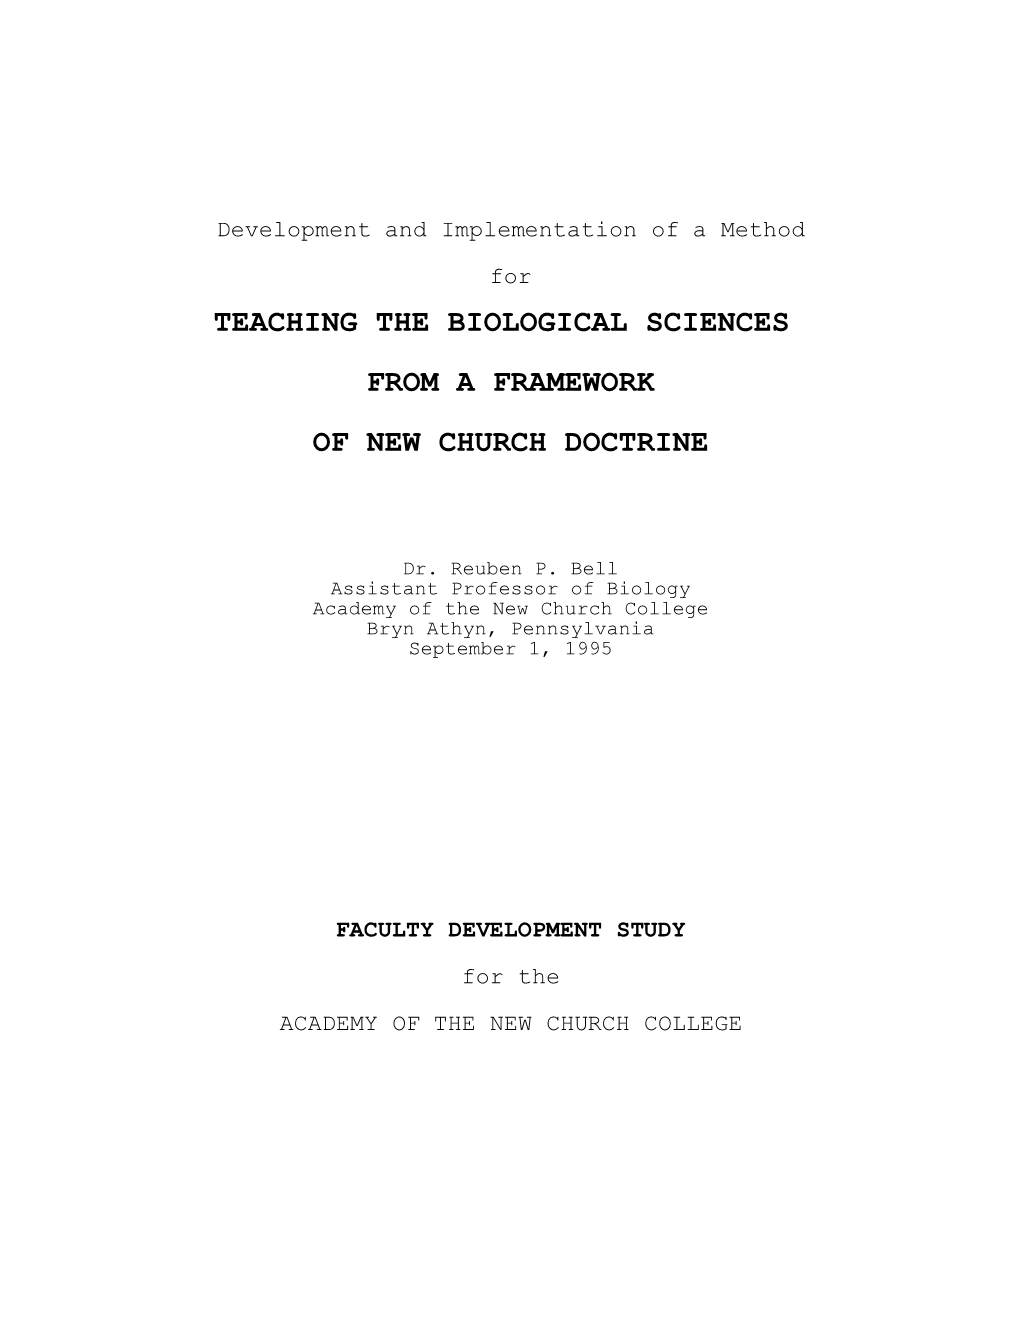 Teaching the Biological Sciences from a Framework of New Church Doctrine